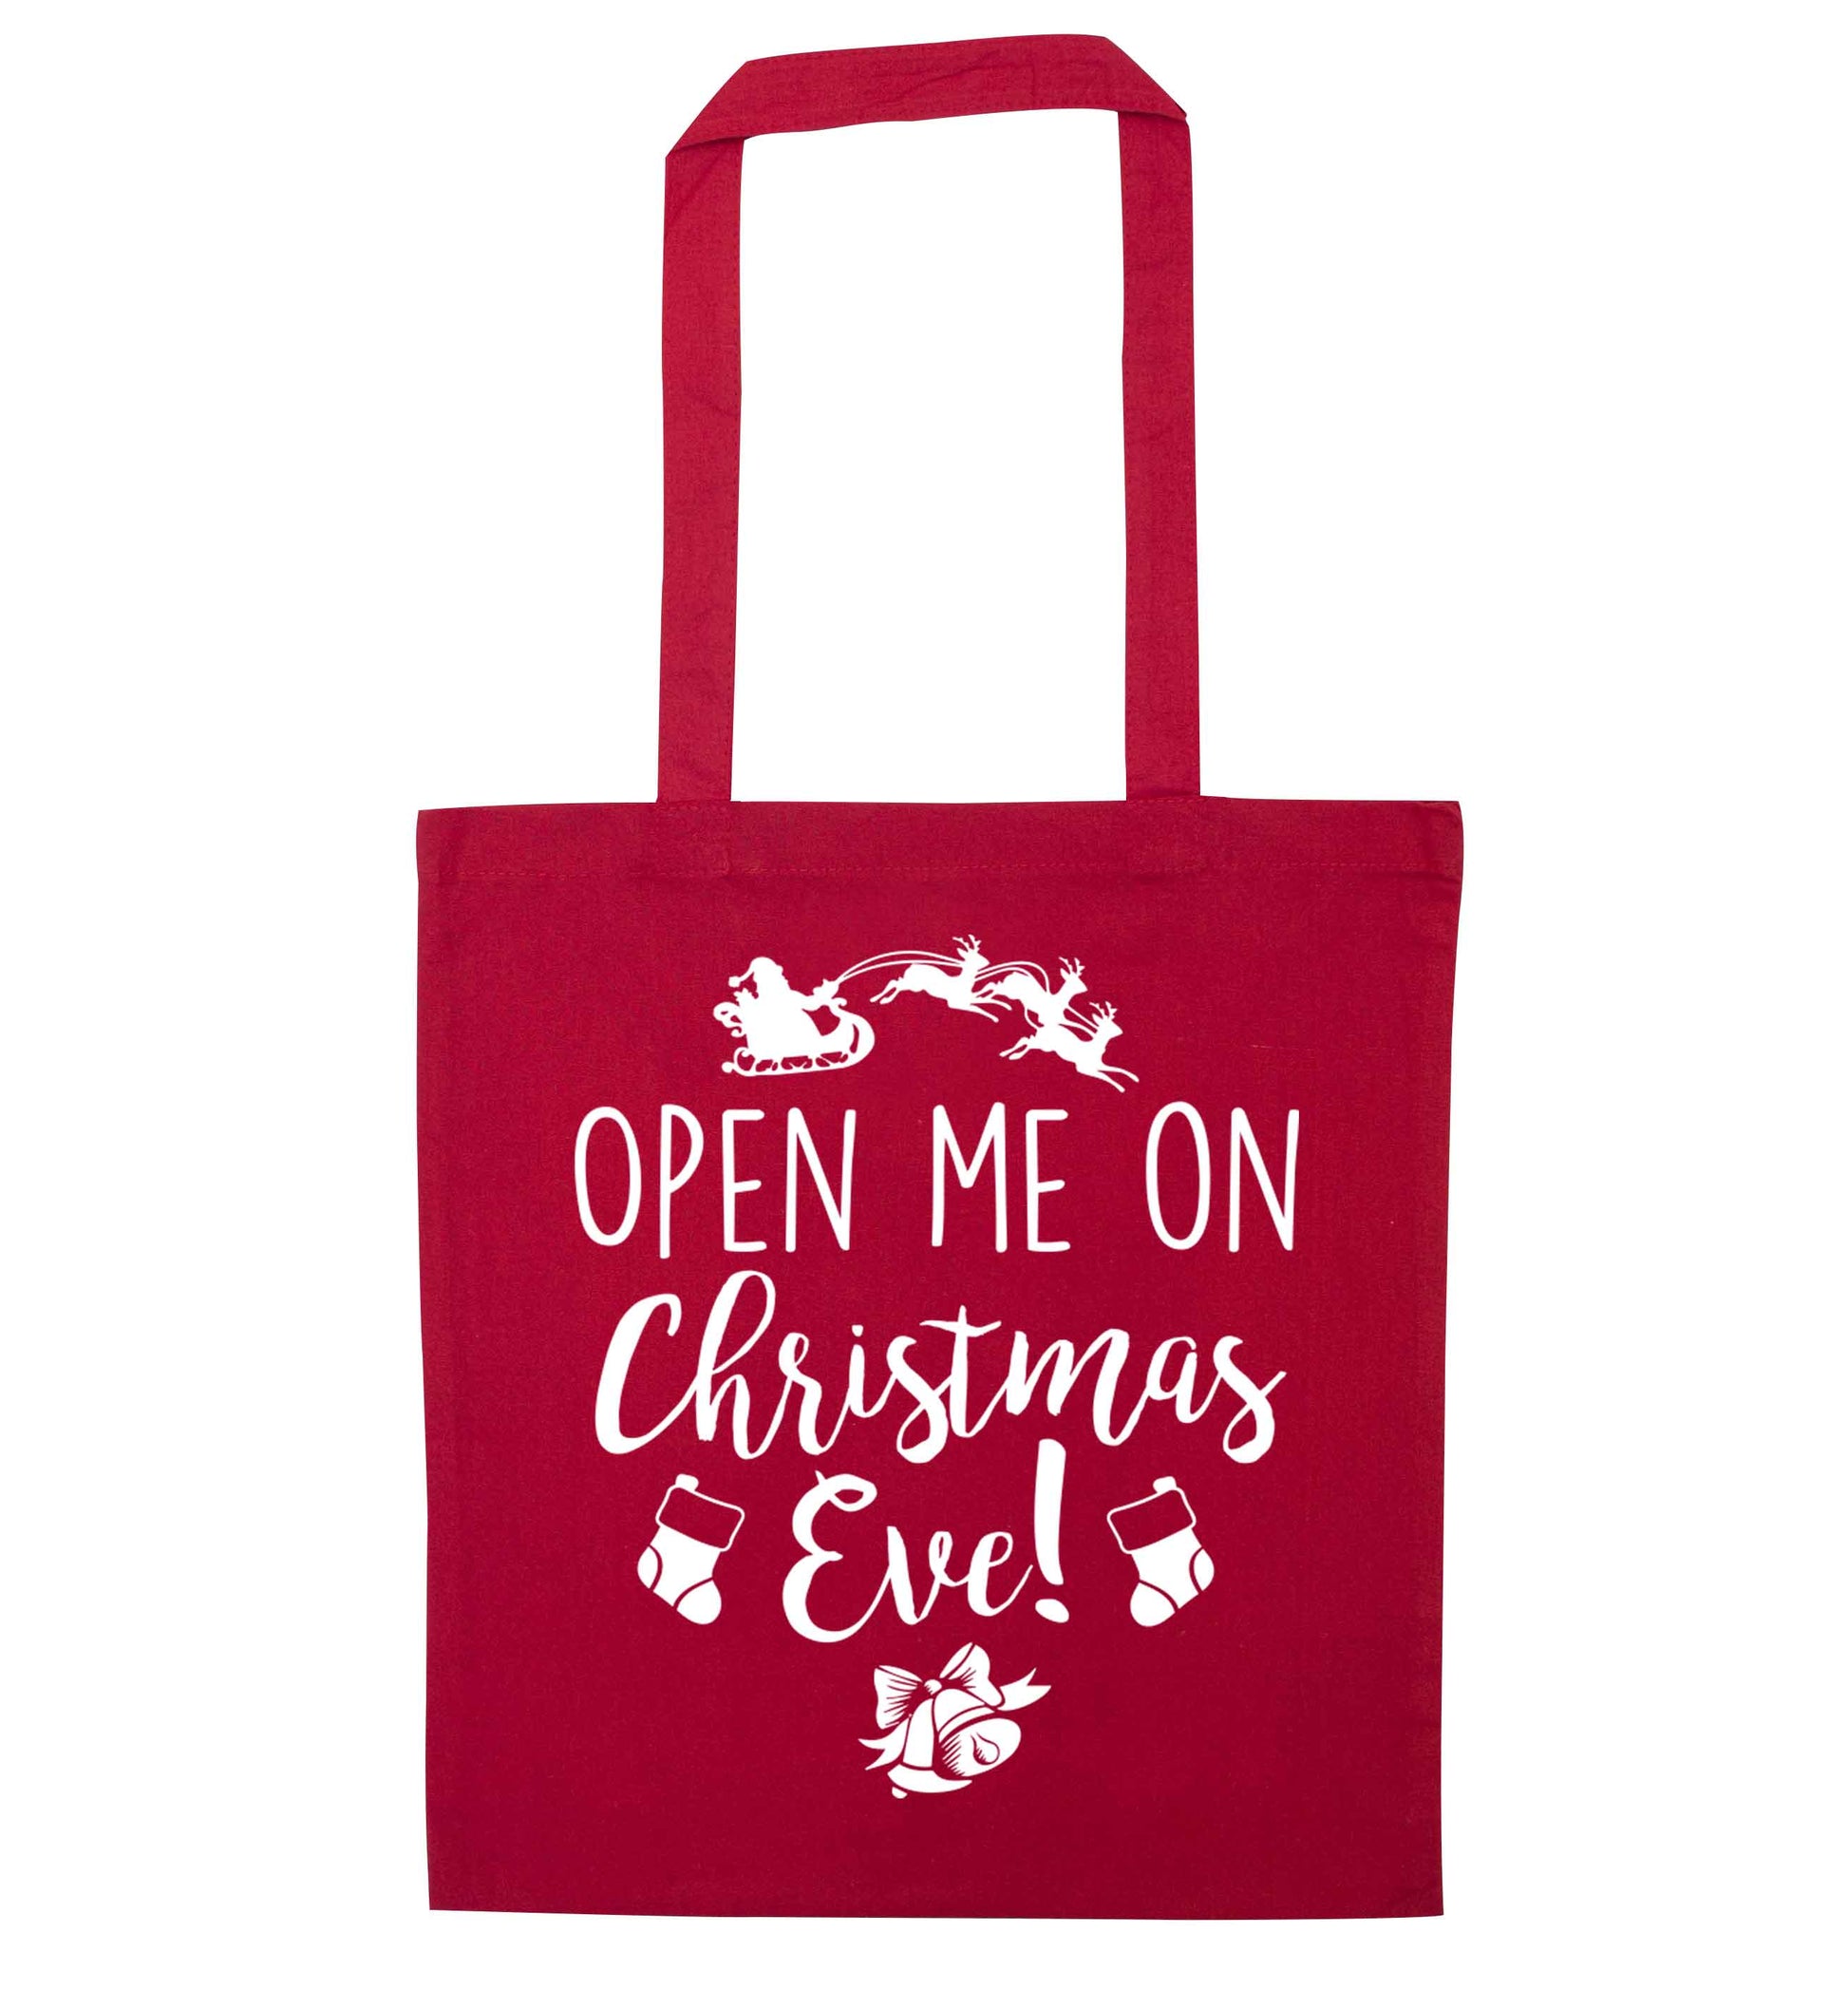 Open me on Christmas Day red tote bag